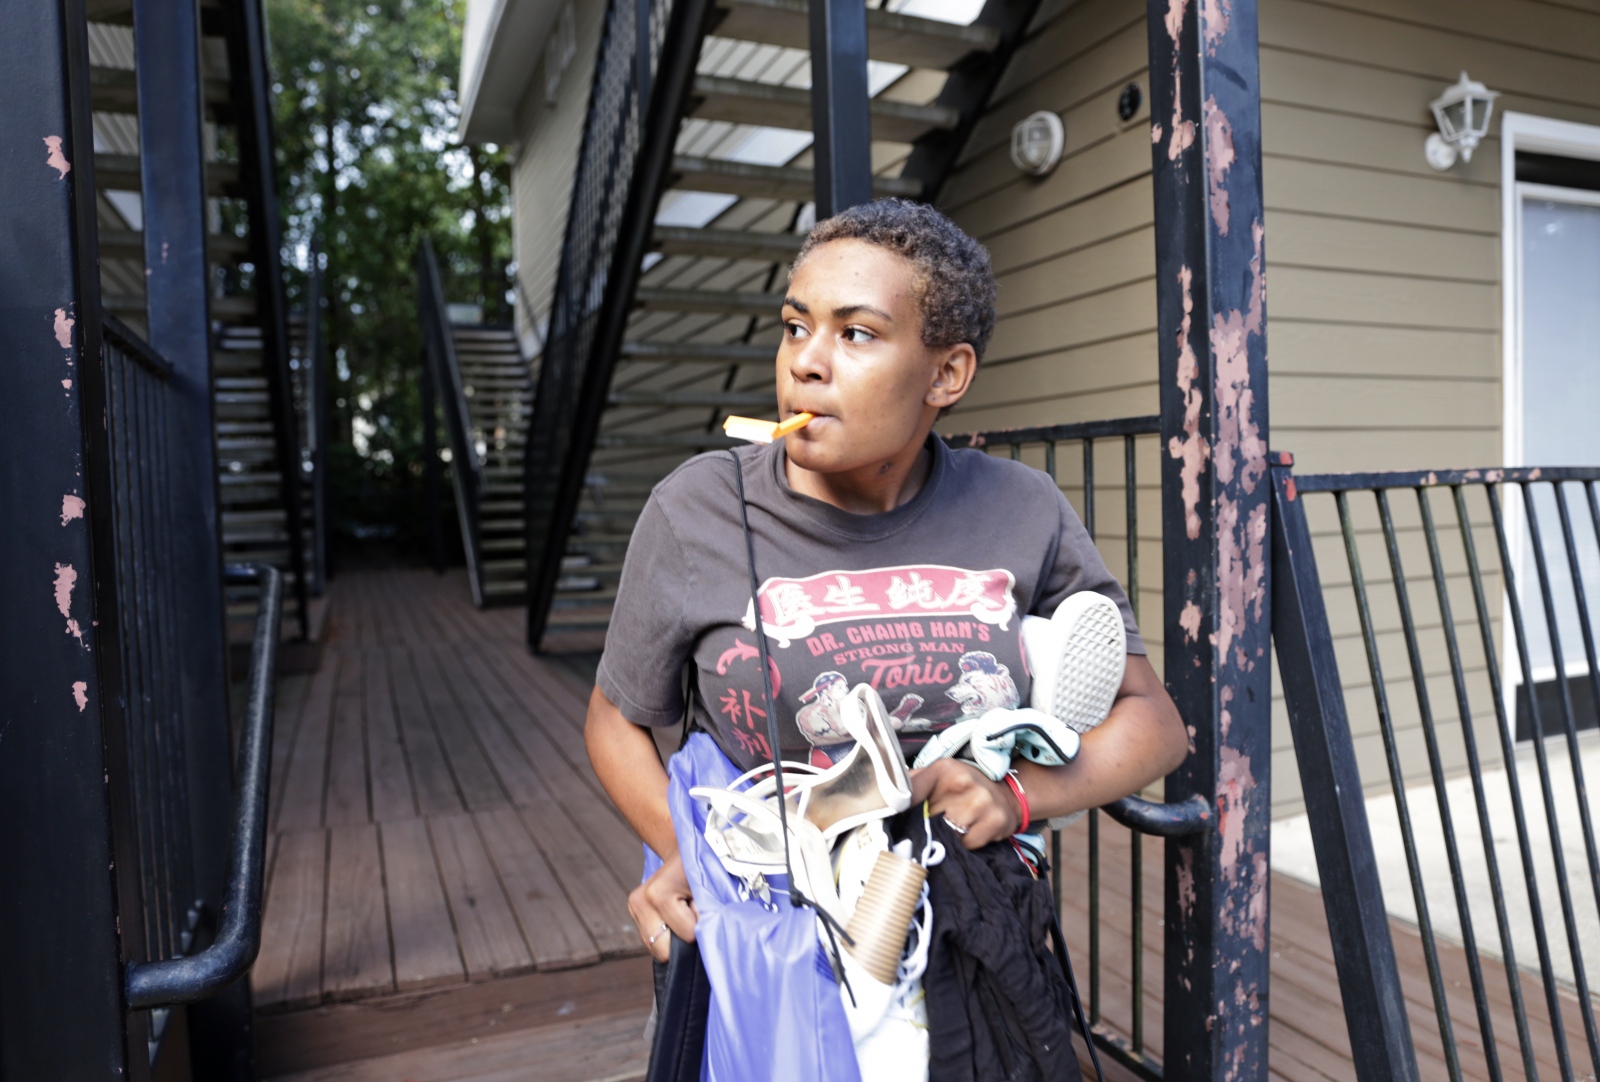  Ravyn Frazier, 15, hustles to ... because she is also unhoused. 